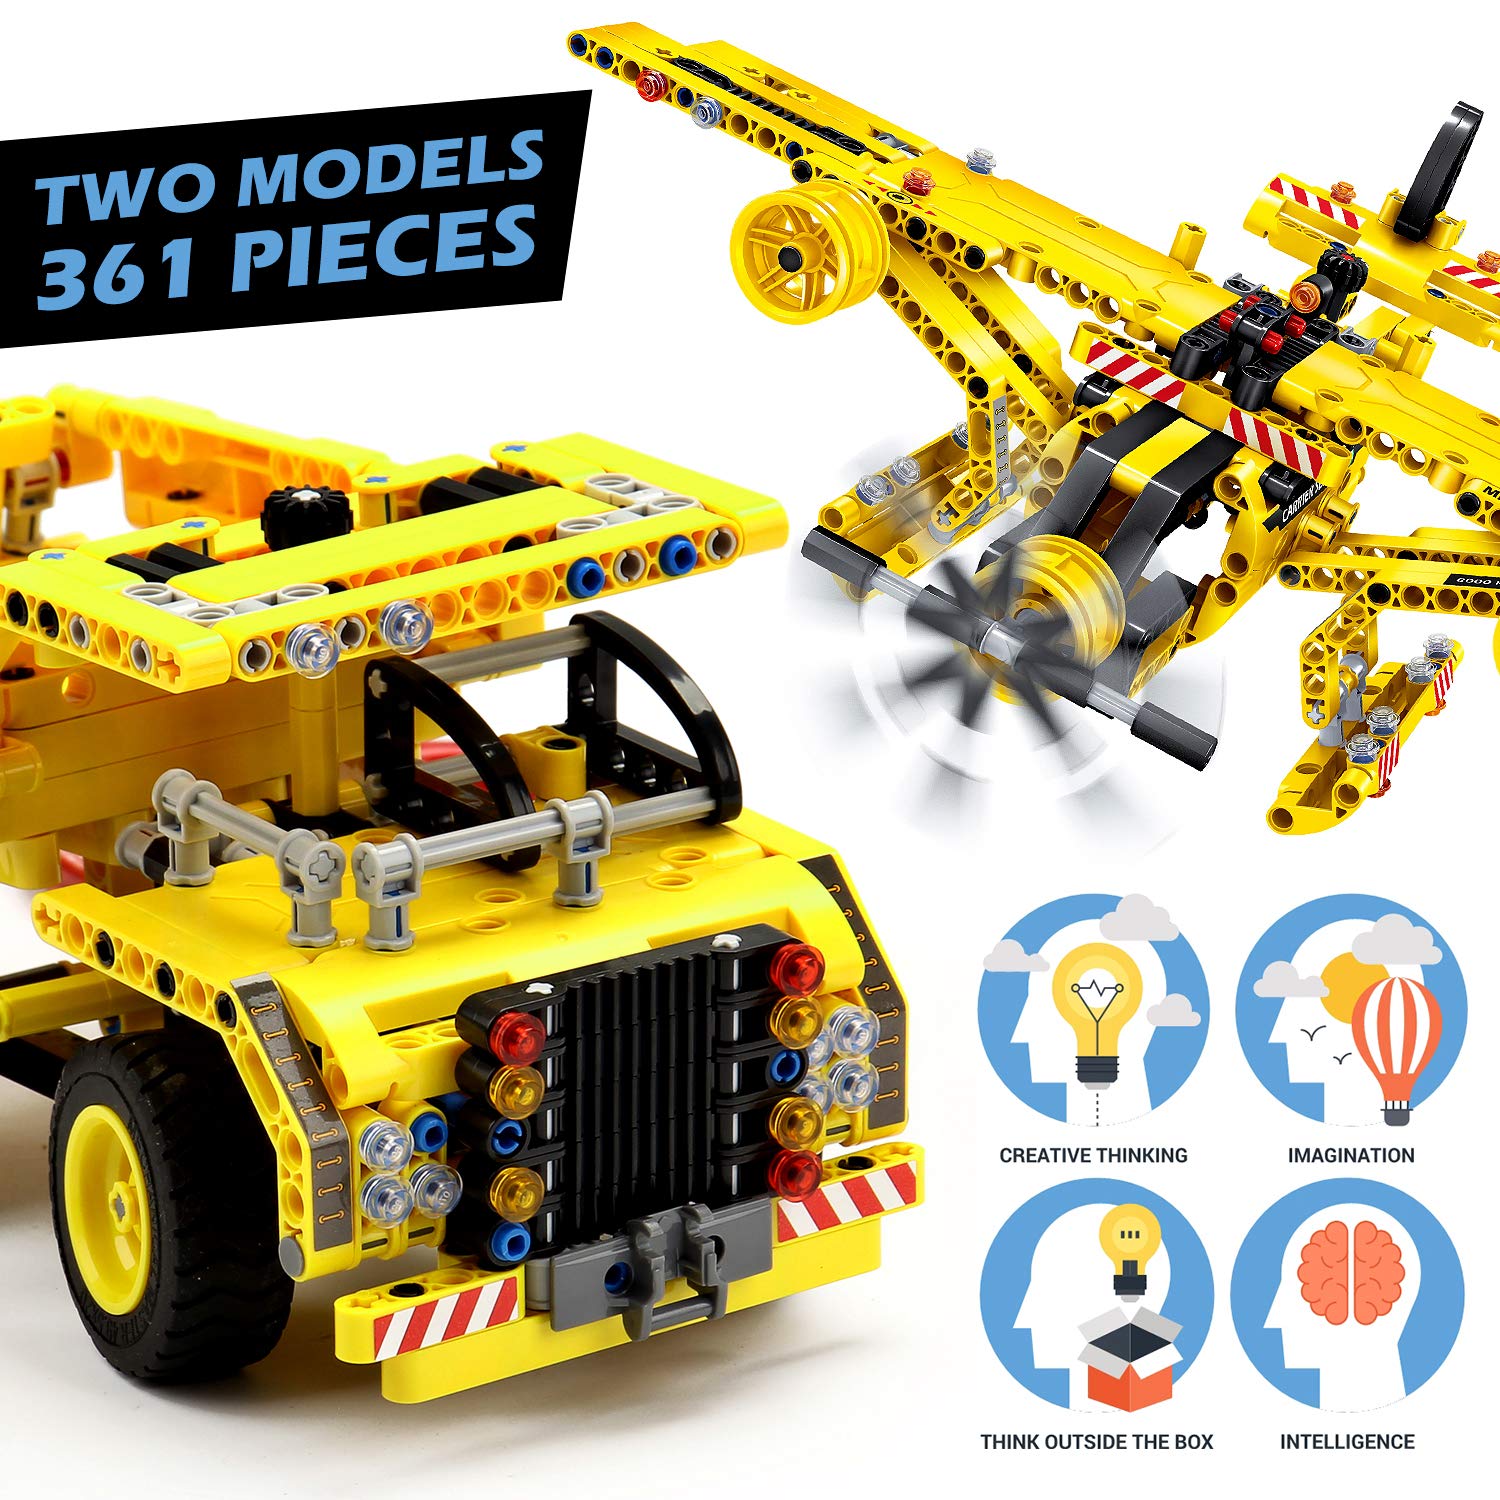 STEM Toys Building Sets for Boys 8-12 - 361 Pcs Construction Engineering Kit Builds Dump Truck or Airplane (2in1) STEM Building Toys Set for Kids - Ages 6 7 8 9 10 11 12 Years Old, Boy Toys Gift